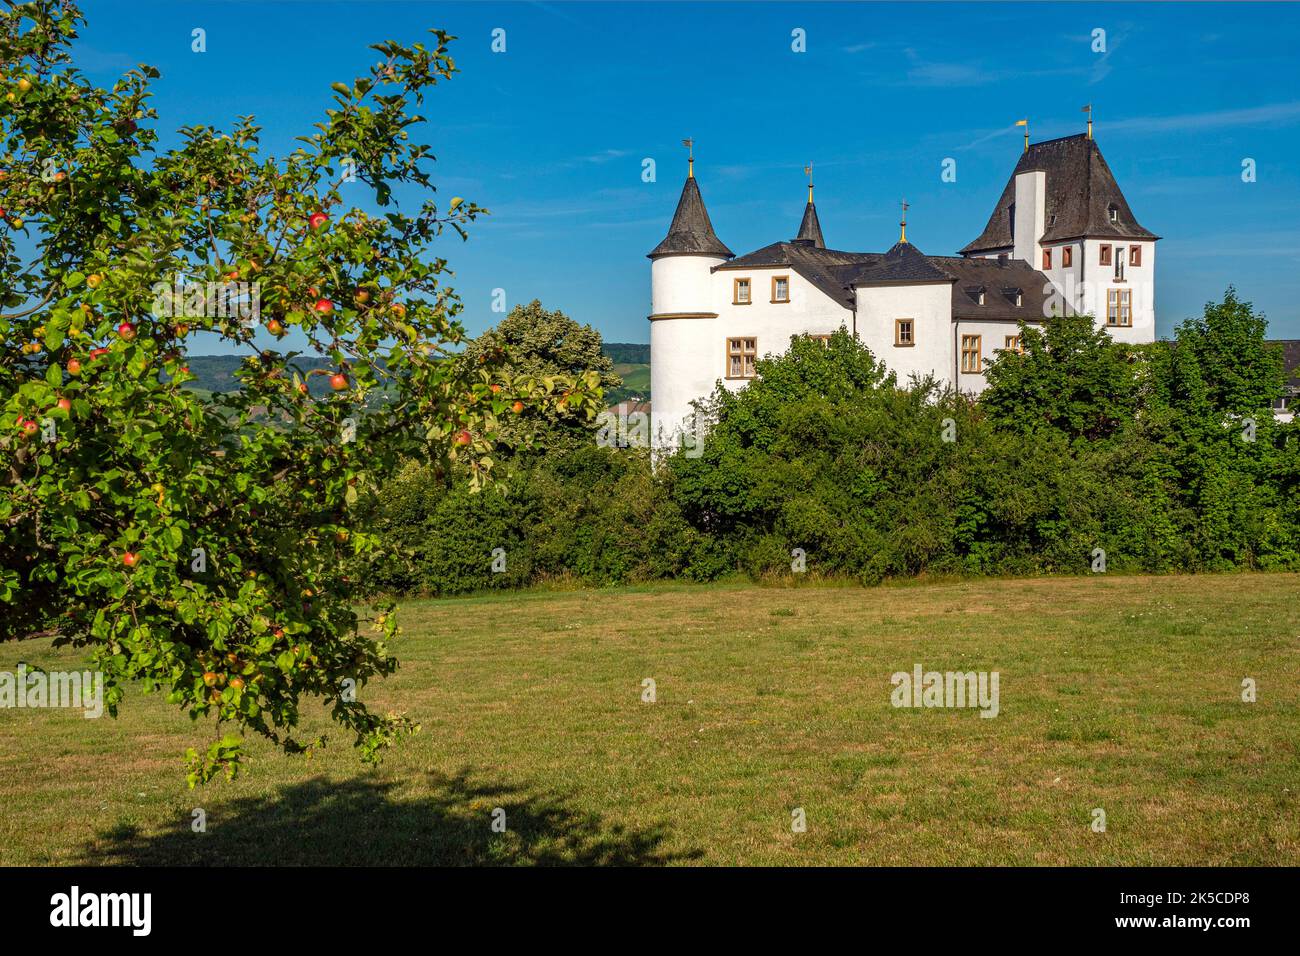 Victor's Residenz Hotel Schloss Berg, Nennig on the Upper Moselle, Moselle Valley, Moselle, Saarland, Germany Stock Photo